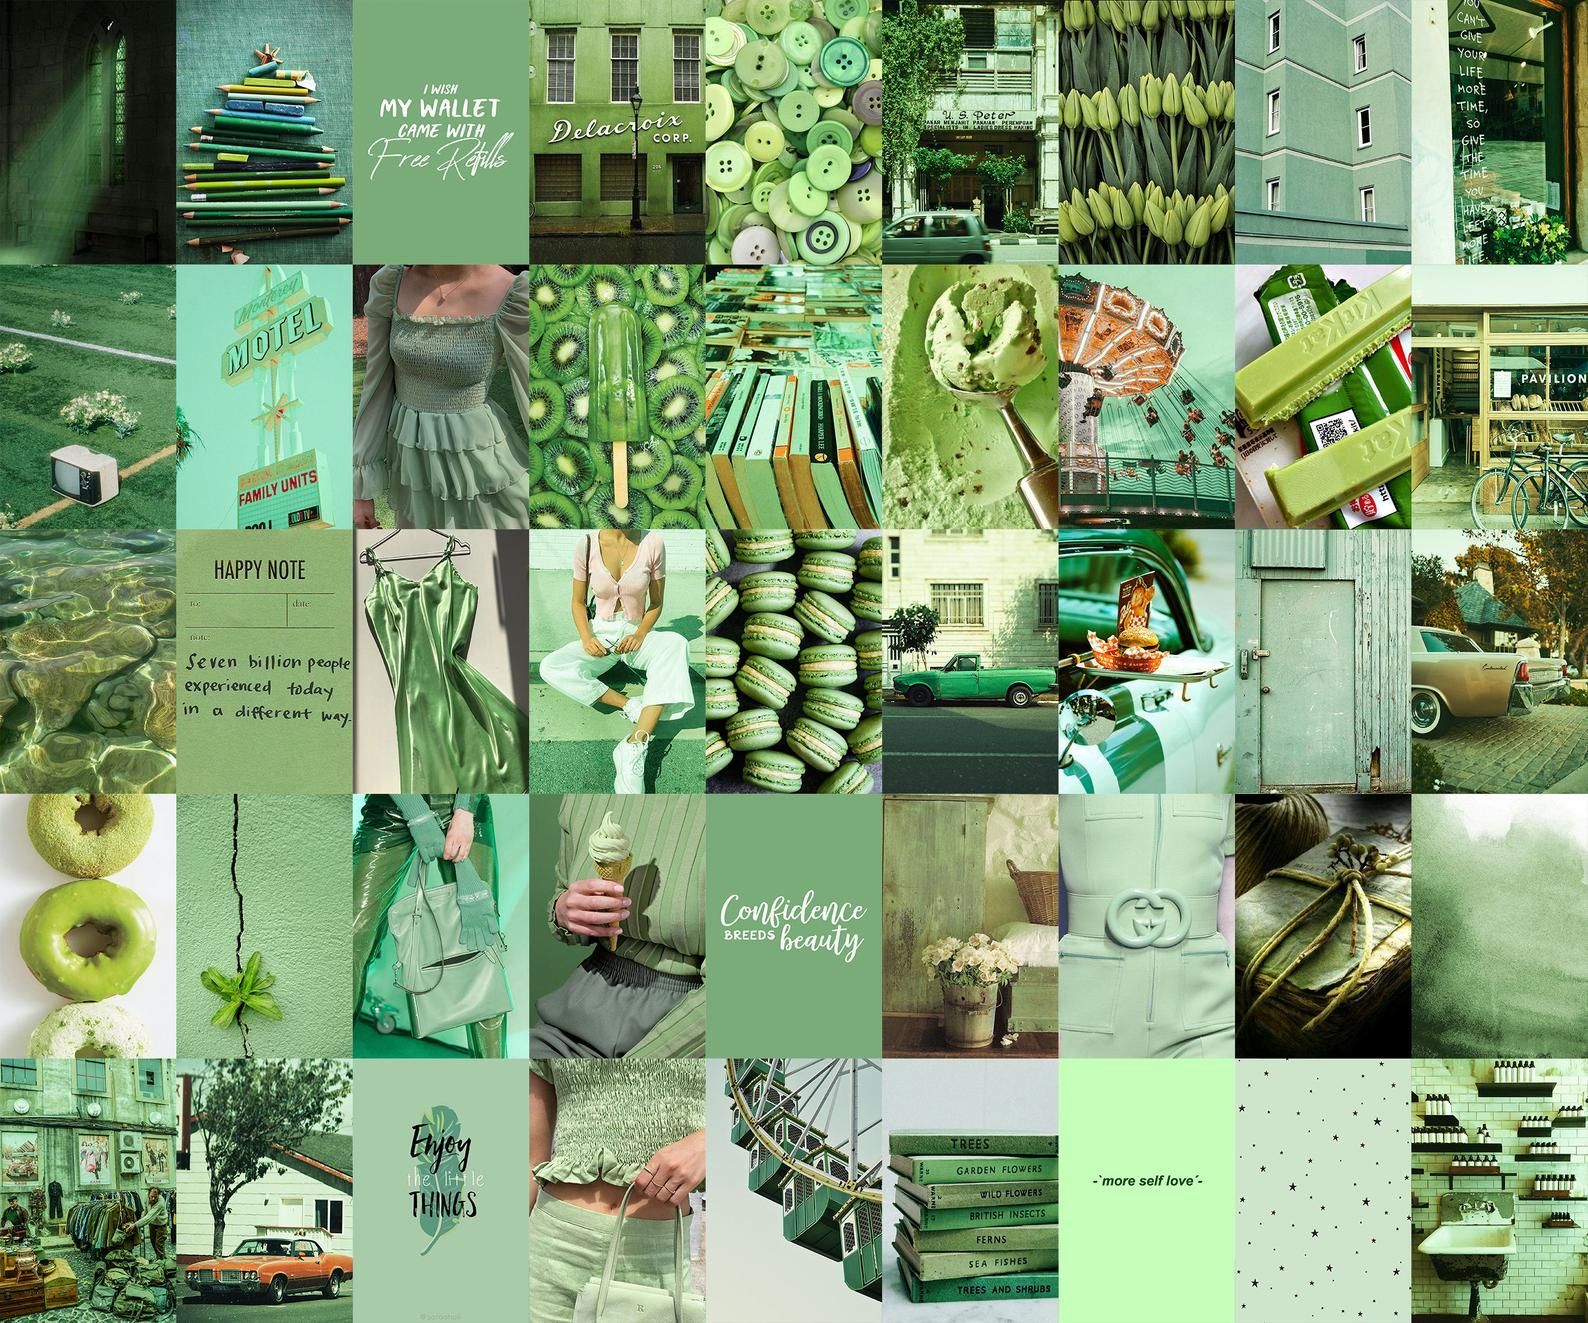 Evergreen Aesthetic Green Wall Collage Kit Digital Copy. Etsy. Green aesthetic, Photo collage, Dark green aesthetic